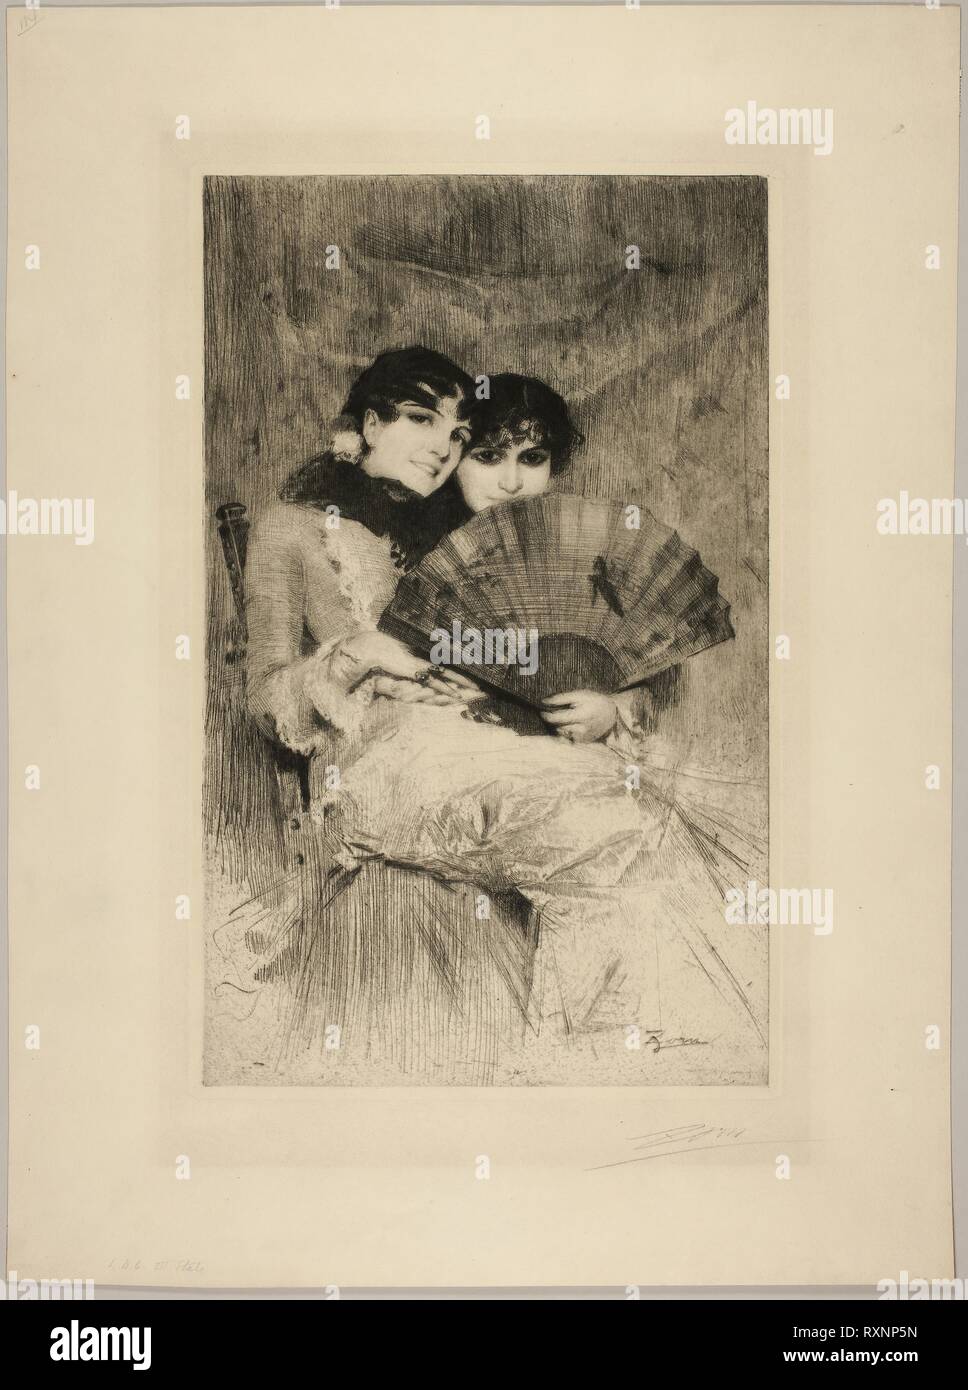 The Cousins. Anders Zorn; Swedish, 1860-1920. Date: 1883. Dimensions: 432 x 268 mm (image); 444 x 279 mm (plate). Etching and drypoint in black on ivory wove paper. Origin: Sweden. Museum: The Chicago Art Institute. Stock Photo